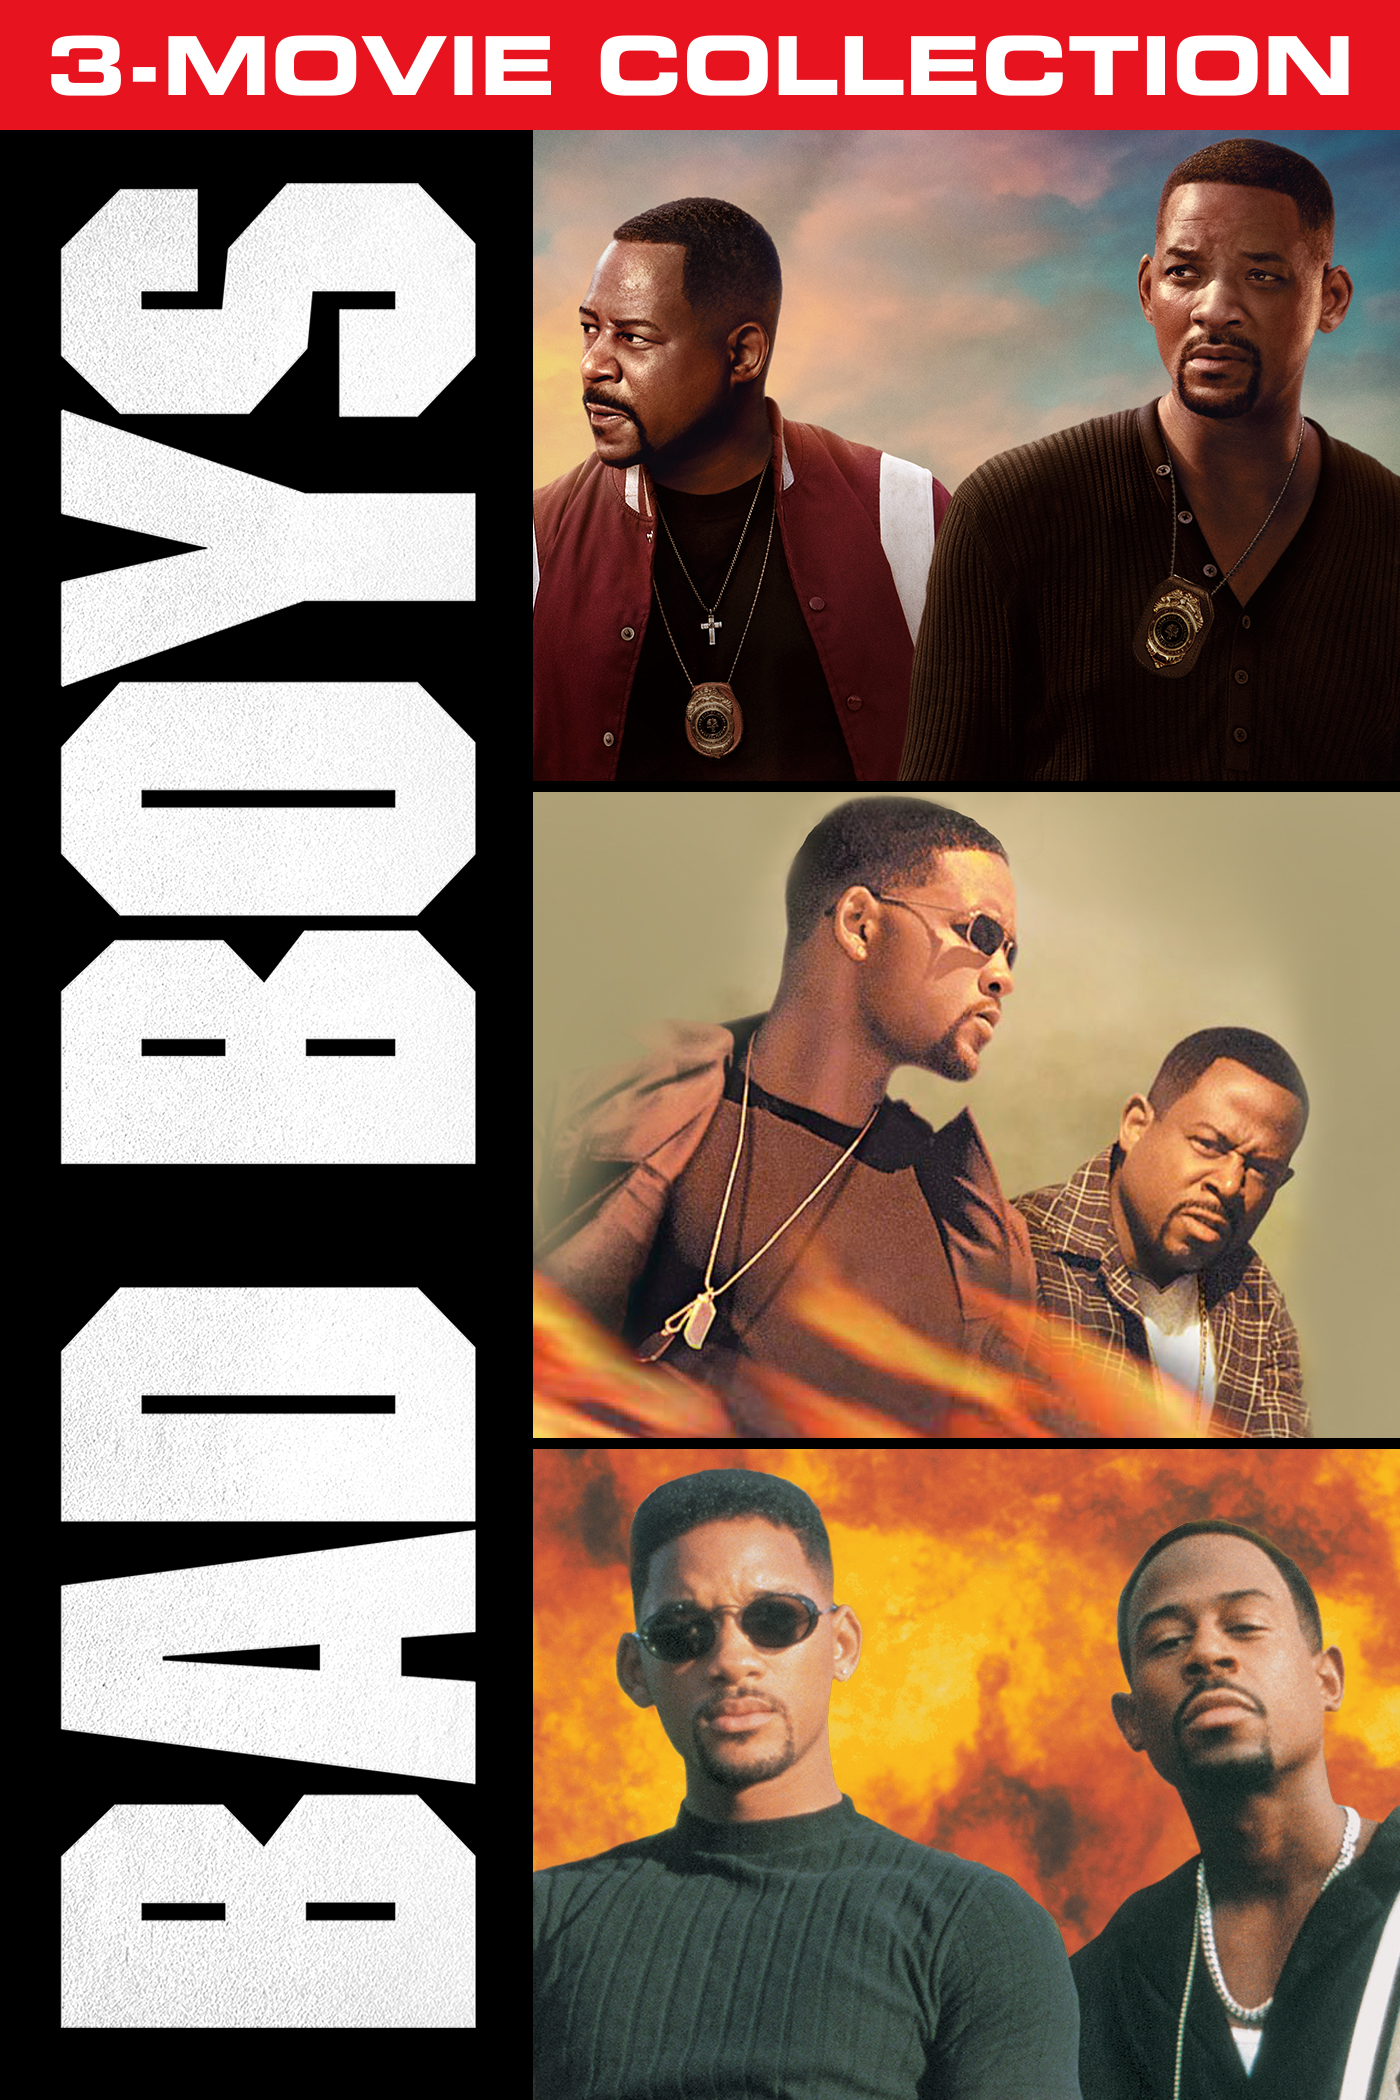 bad boys 3 release date